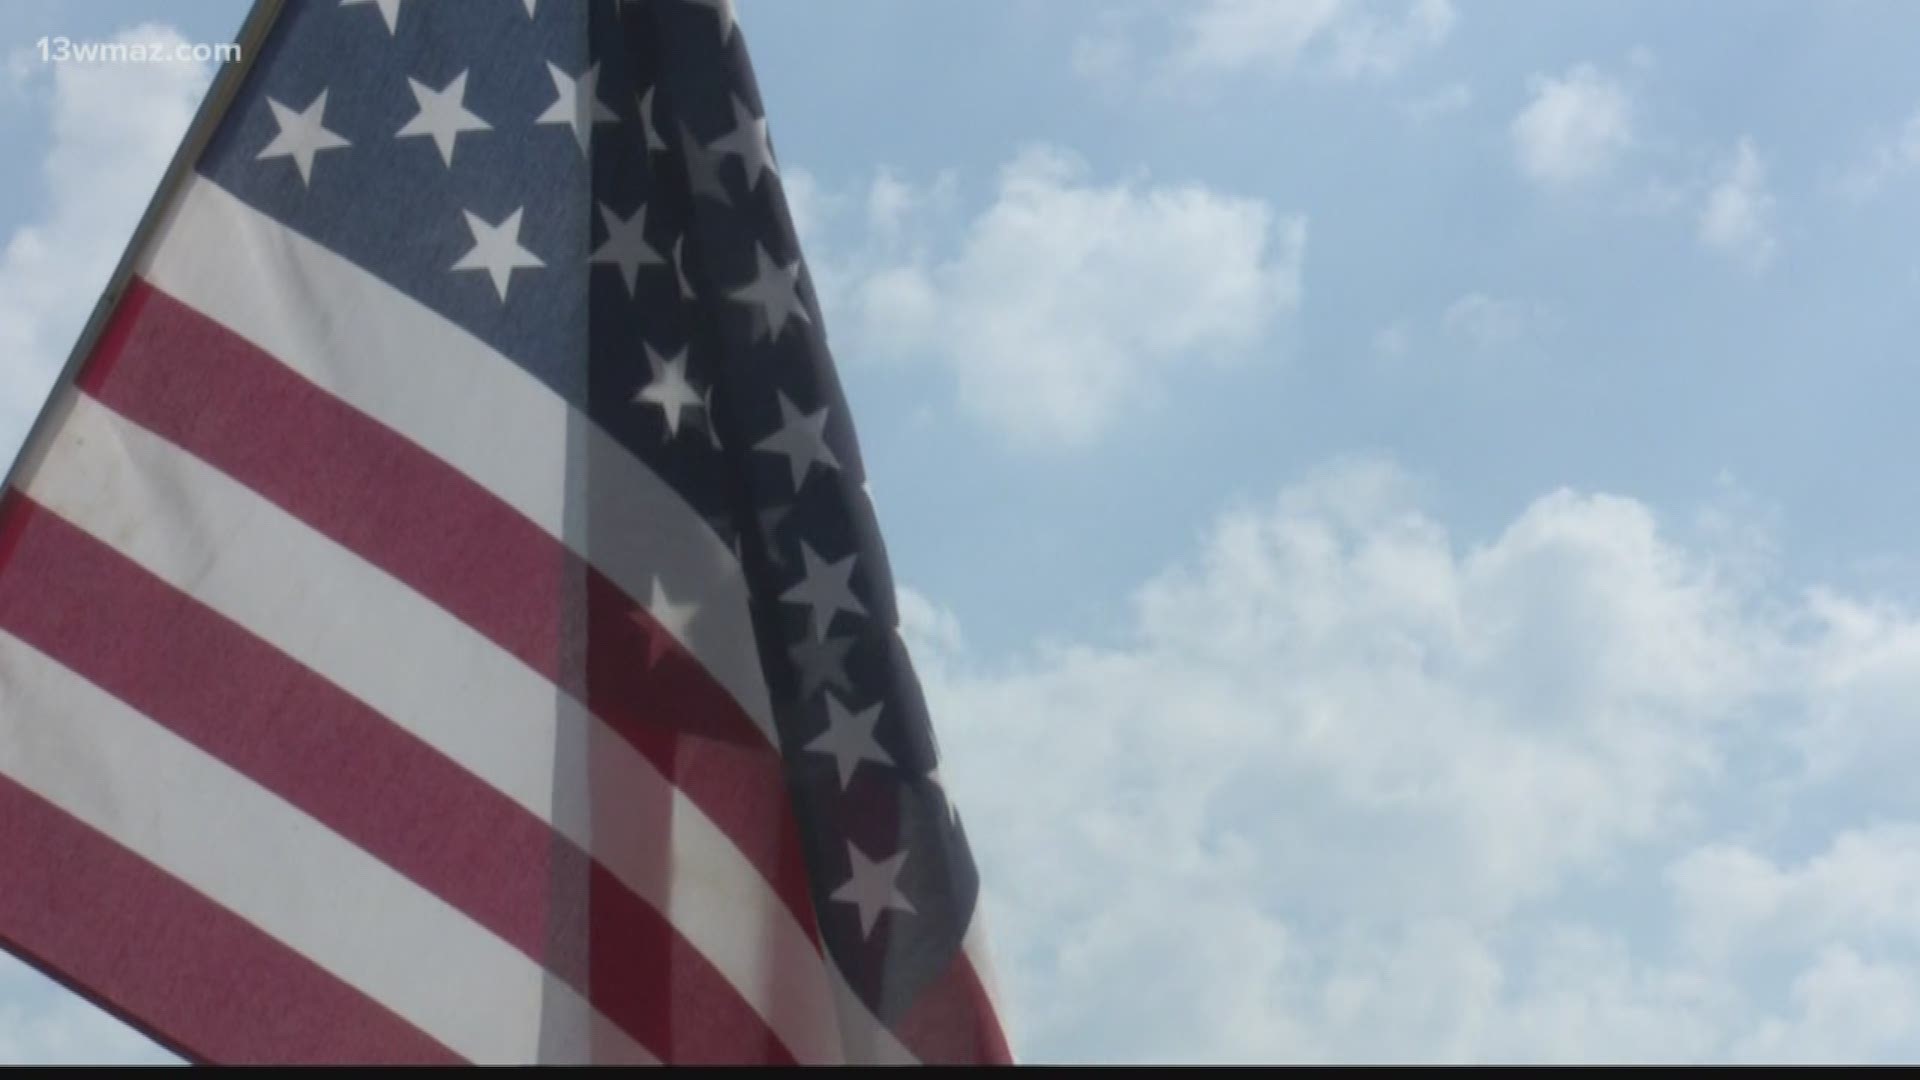 Over Memorial Day weekend, people find many different ways to remember our fallen troops. One Central Georgia family put up more than two dozen flags on their farm.